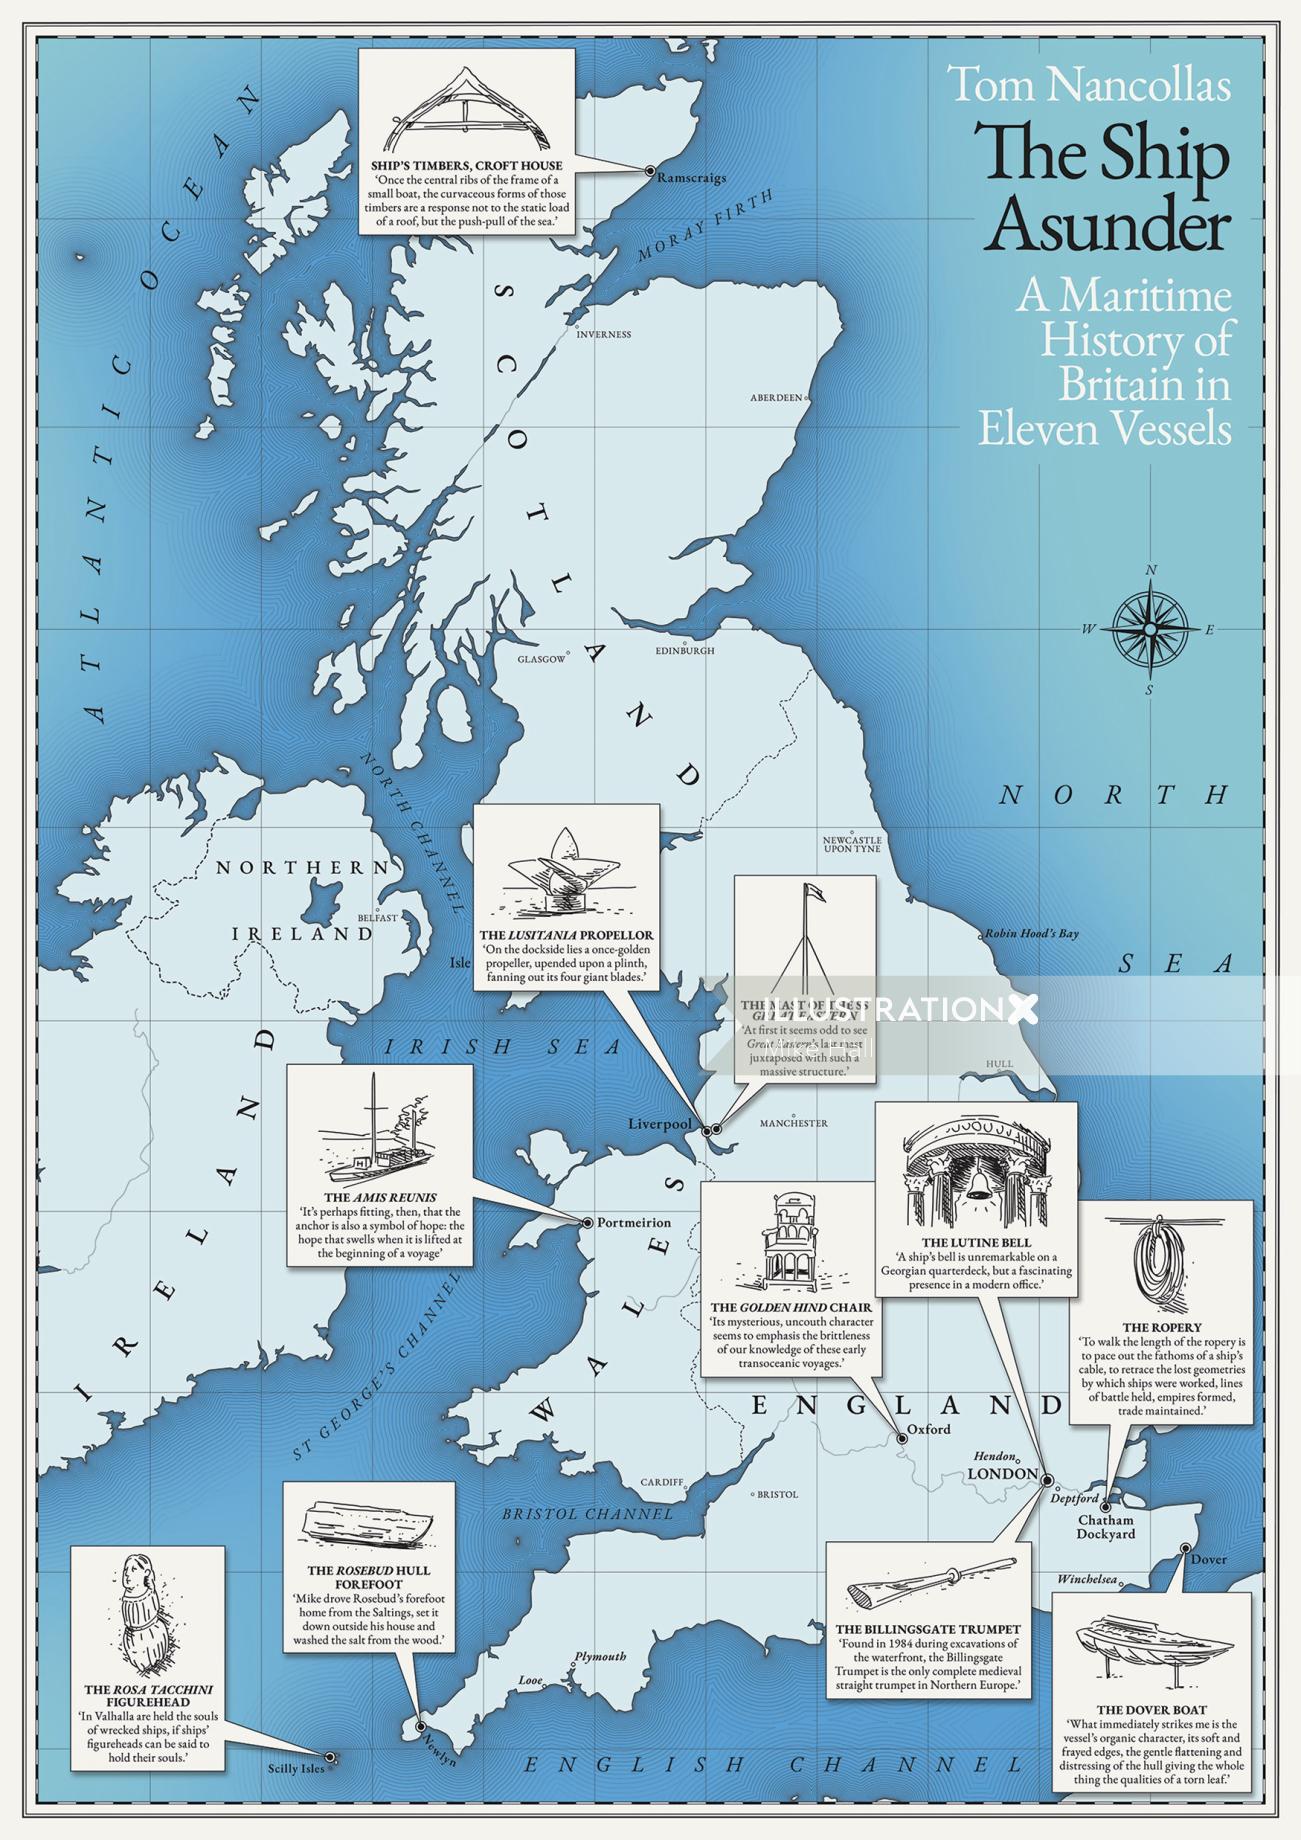 A map of Britain's Maritime History in Eleven Vessels